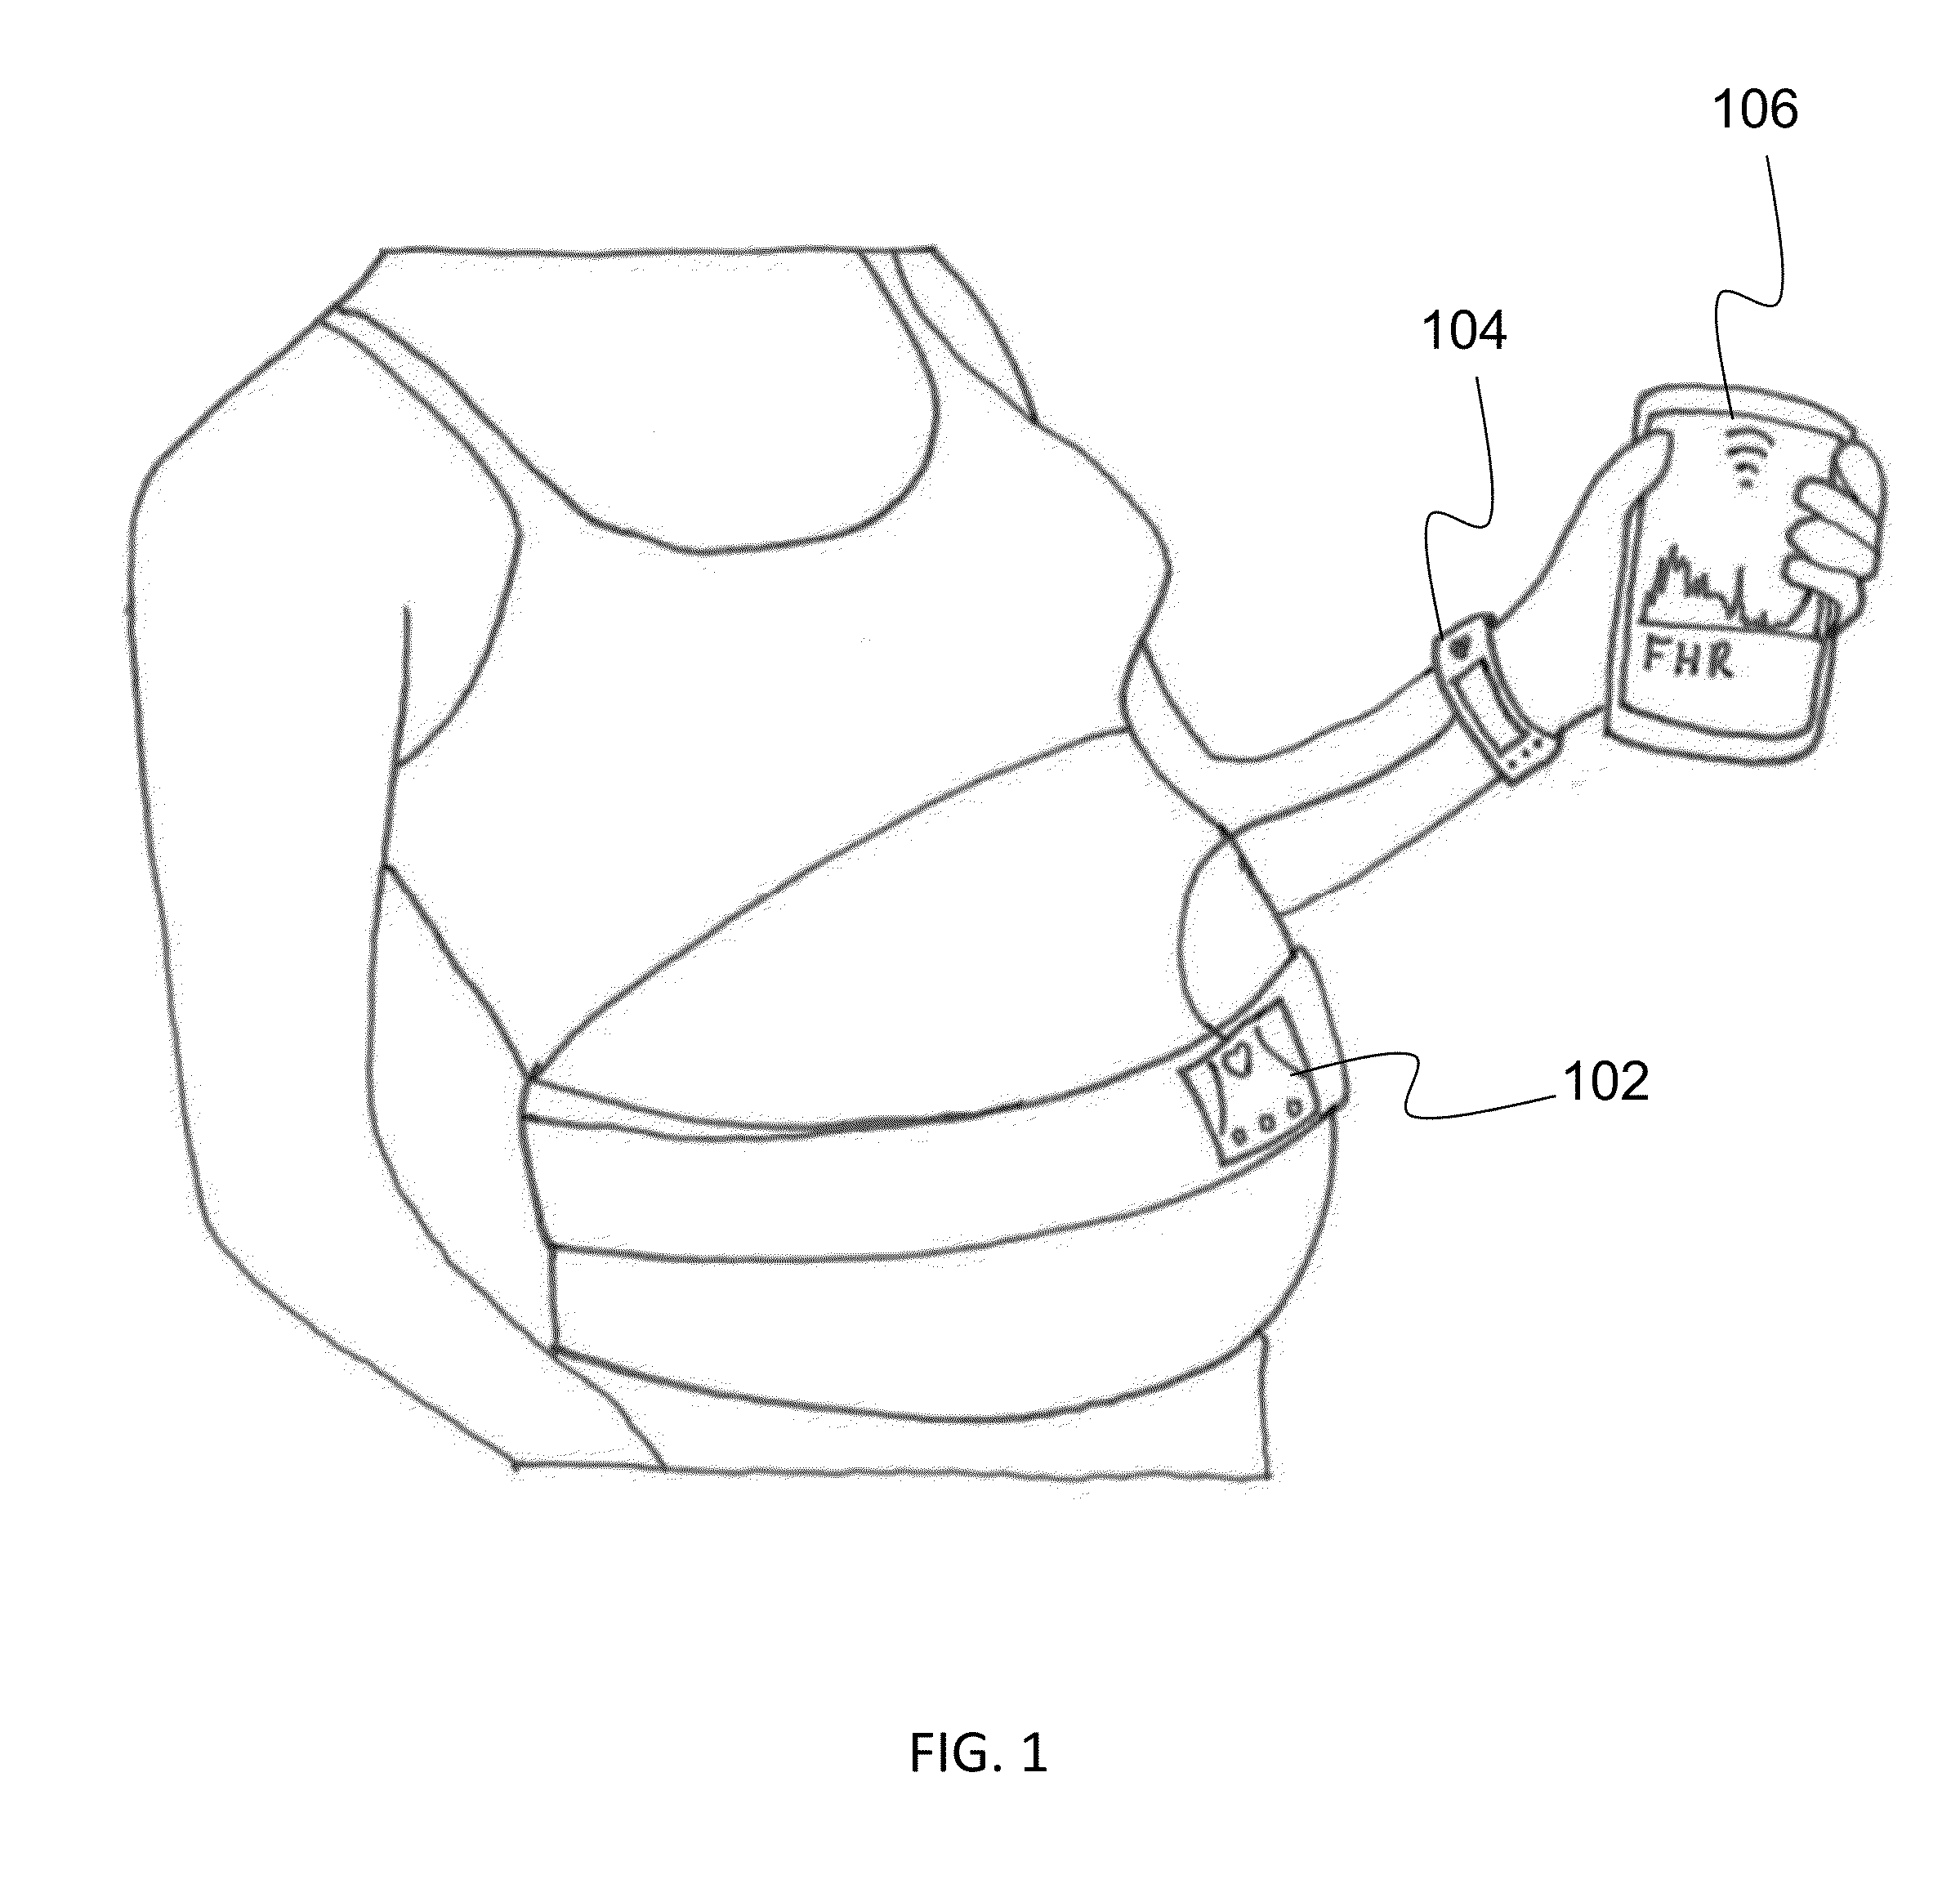 Systems, methods and devices for remote fetal and maternal health monitoring